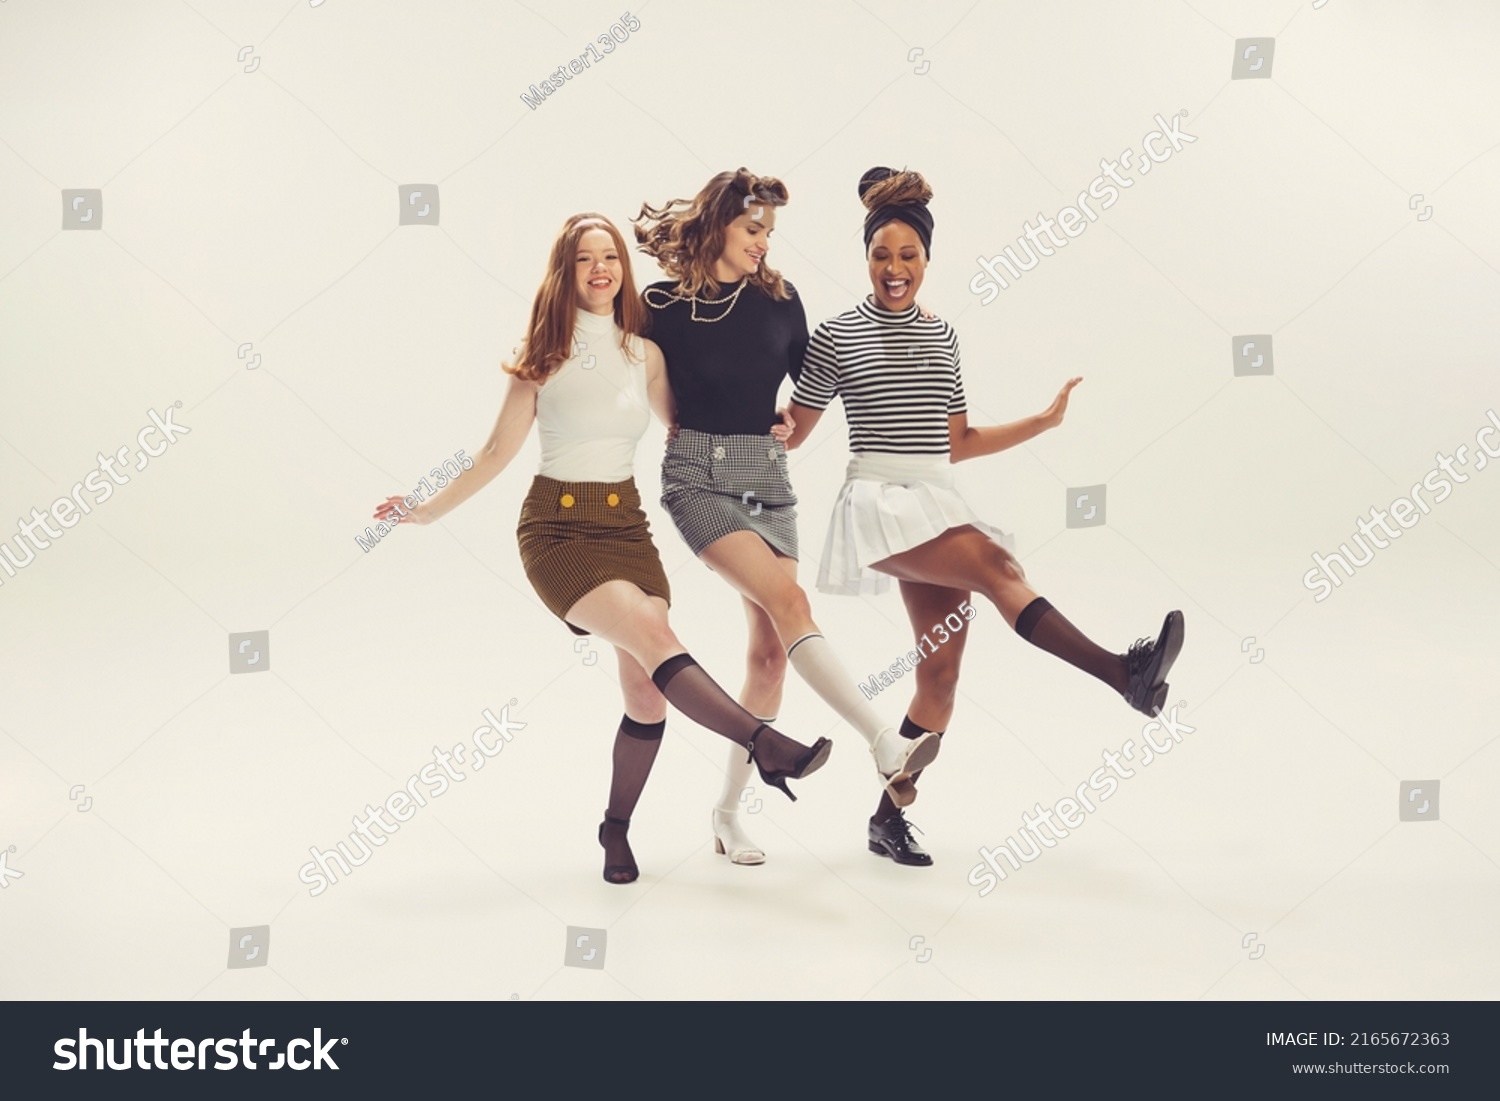 Dancing. Pretty young girls in retro 80s, 90s fashion style, outfits isolated over white studio background. Concept of eras comparison, beauty, fashion and youth. Look happy, excited, delighted #2165672363